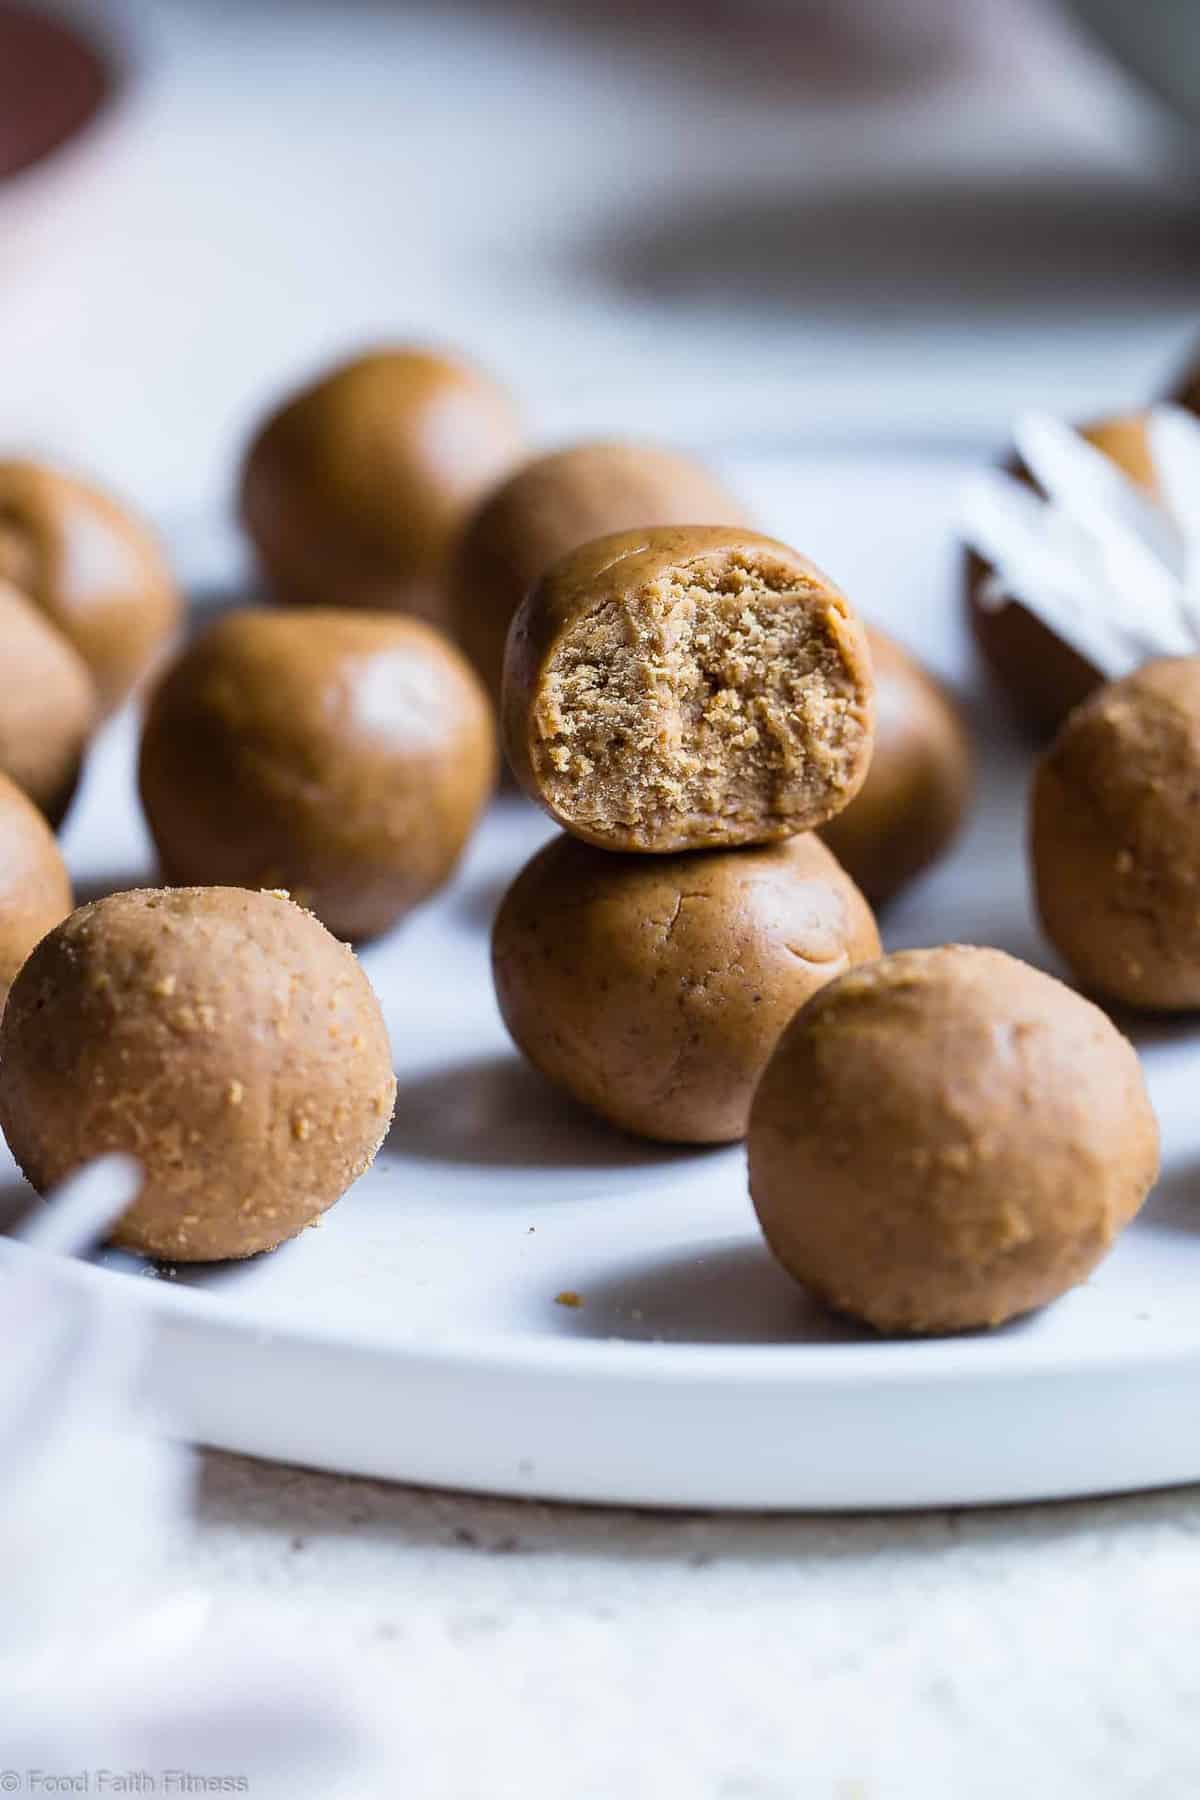 Peanut Butter Protein Cookie Dough Bites - This easy recipe is only 4 ingredients and take 10 mins!  Gluten free, dairy free and PACKED with protein too!  A healthy snack for kids or adults!  |  #Foodfaithfitness |  #Glutenfree #Dairyfree #PeanutButter #Healthy #CookieDough